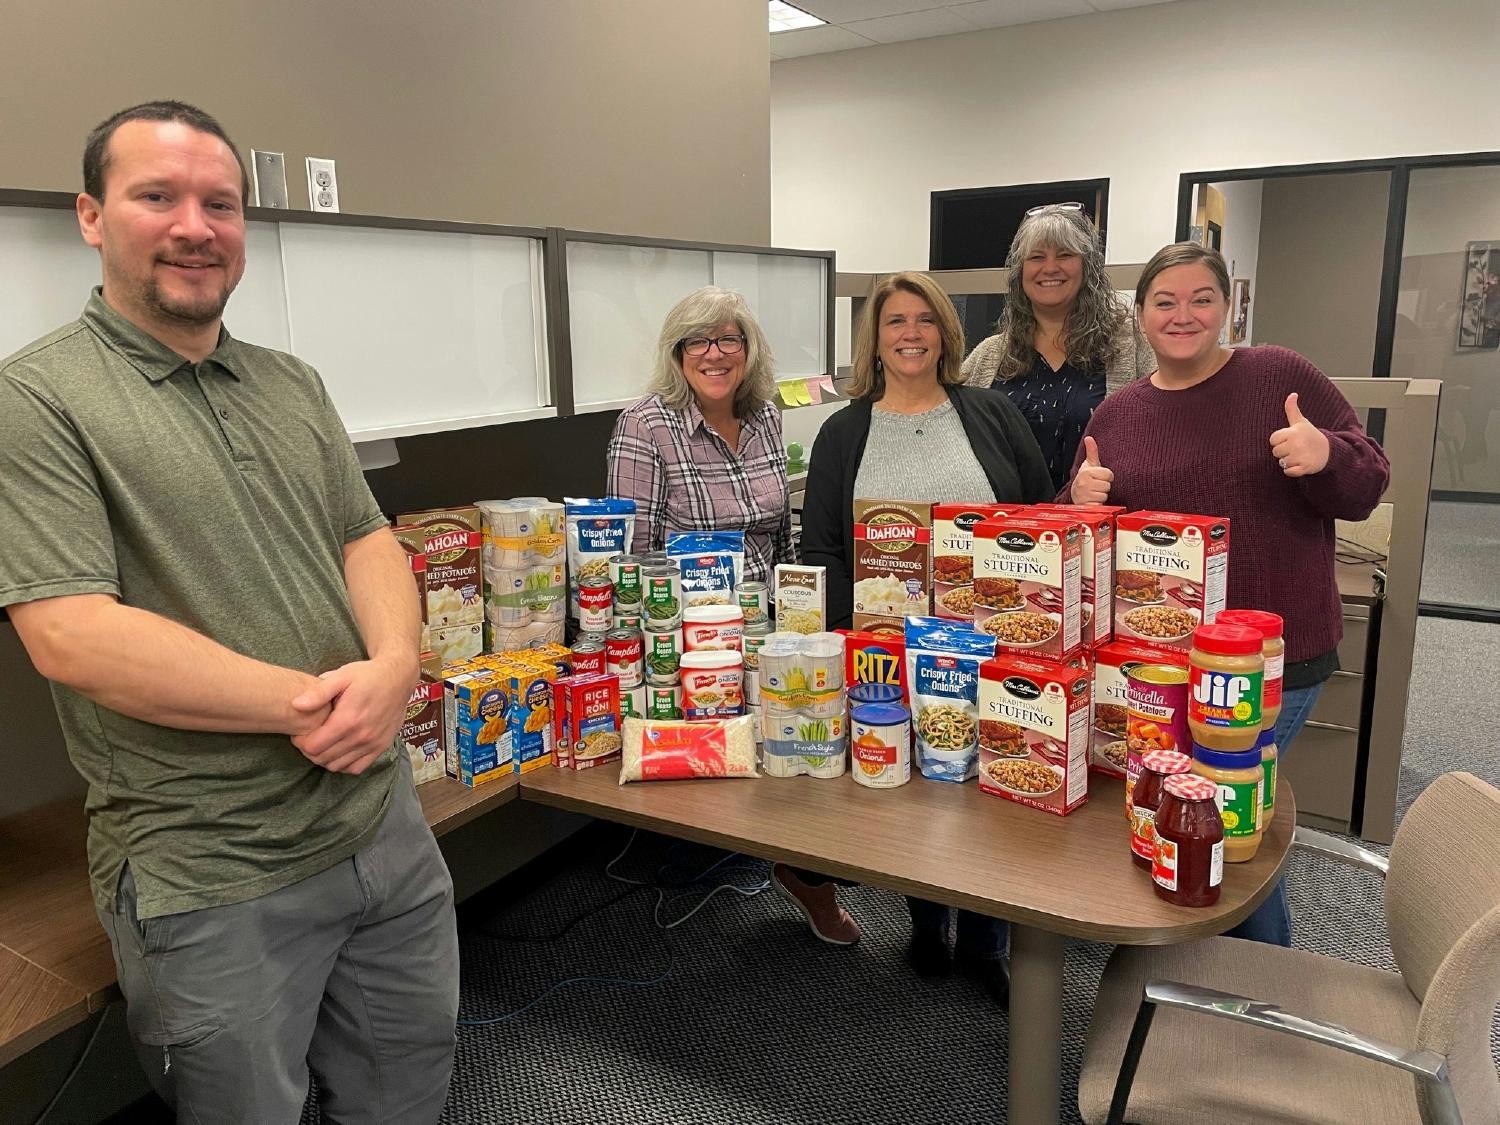 MSI enjoys supporting their local communities through various donation events, including food, toy, and clothing drives.